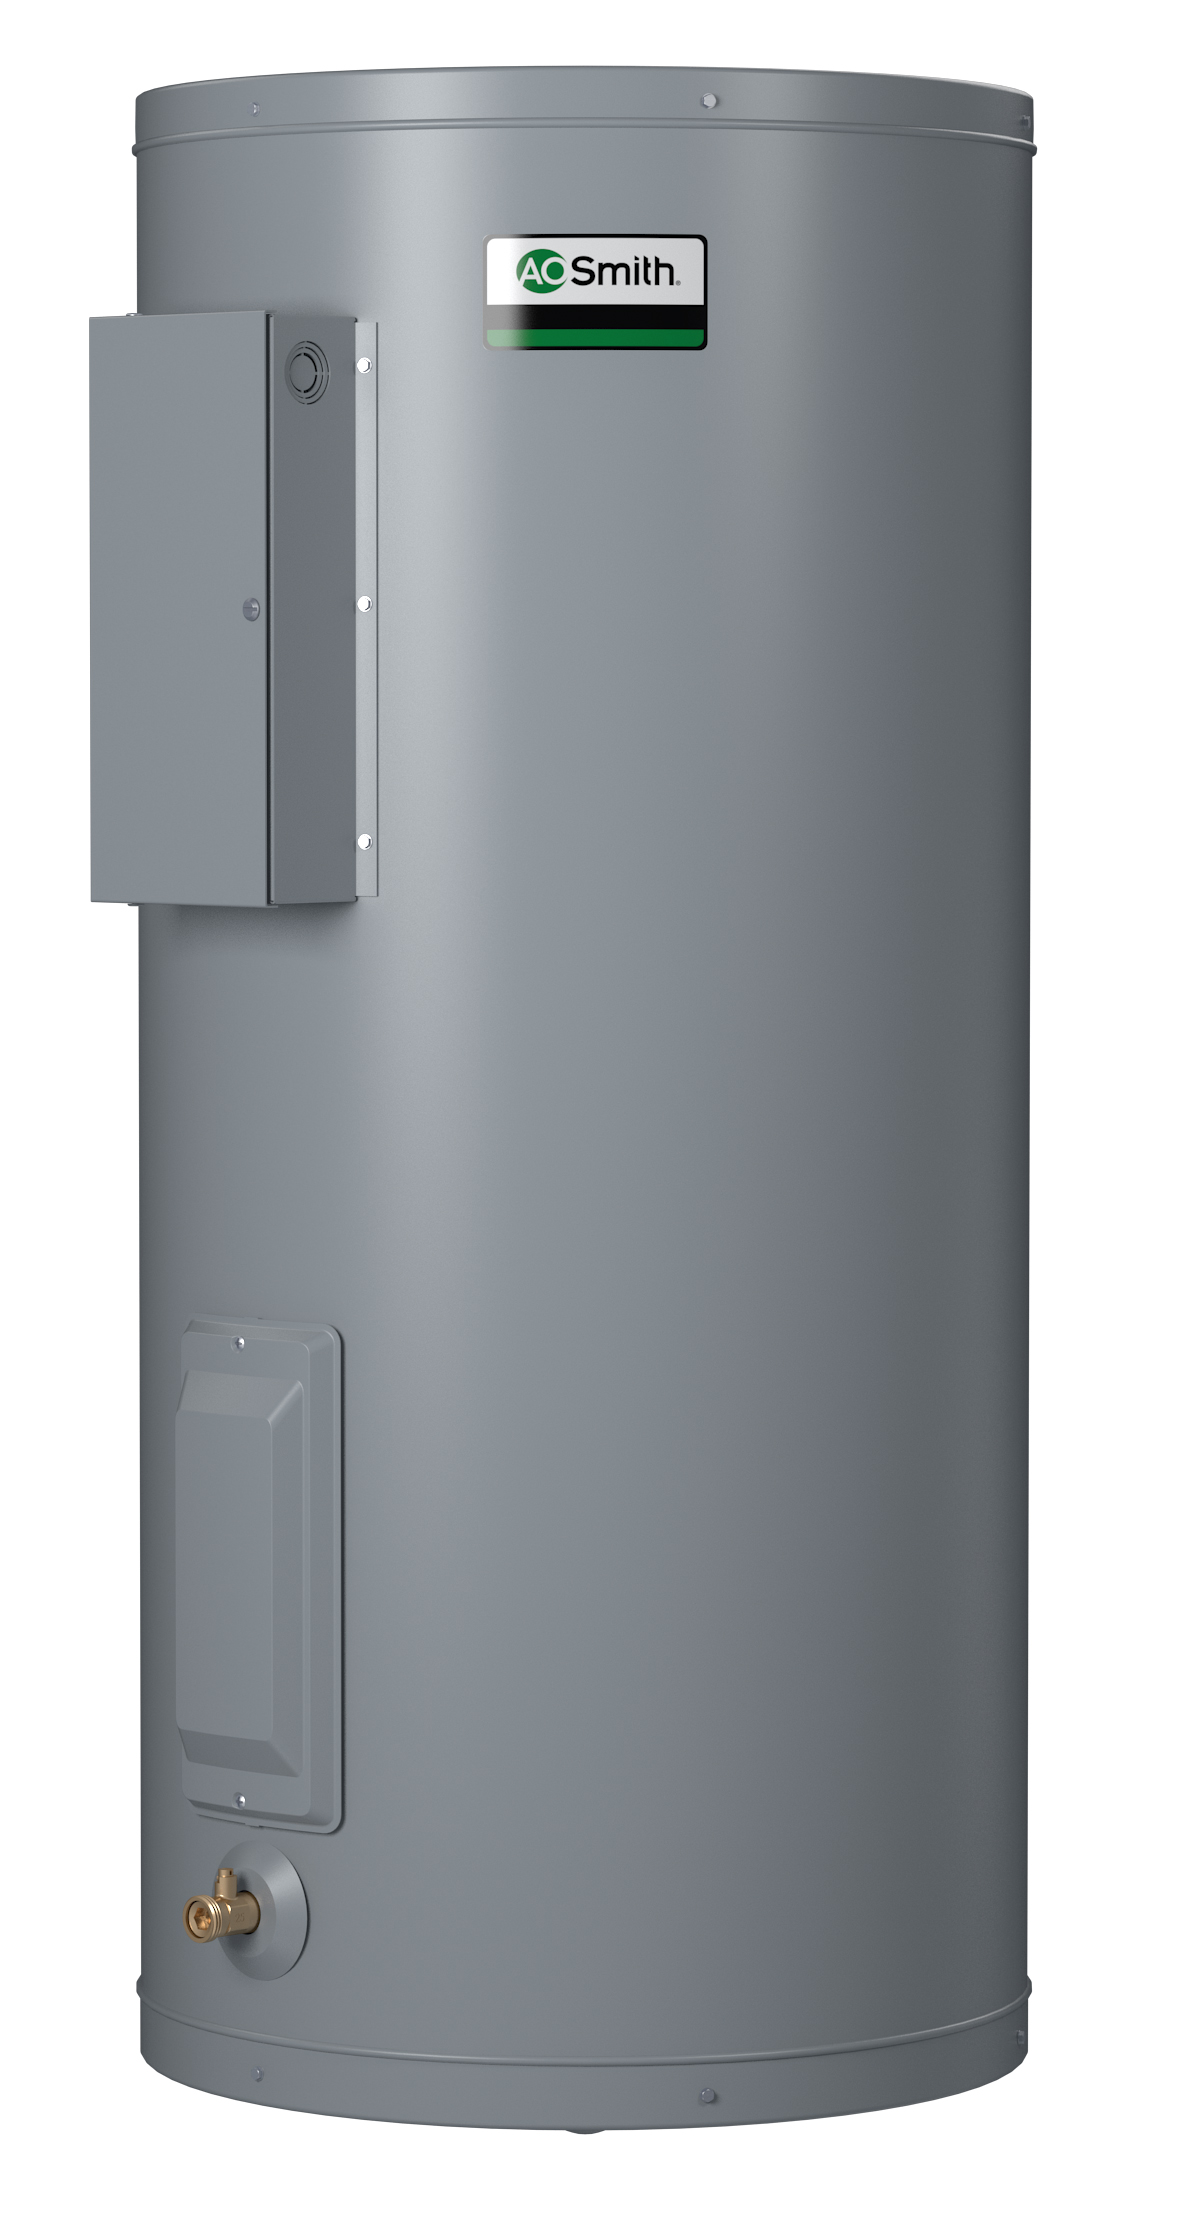 AO SMITH DEN-40D: 50 GALLONS, 5.0KW, 480 VOLT, 3 PHASE, (2-5000 WATT ELEMENTS, NON-SIMULTANEOUS WIRING), DURA-POWER, LIGHT DUTY COMMERCIAL ELECTRIC WATER HEATER